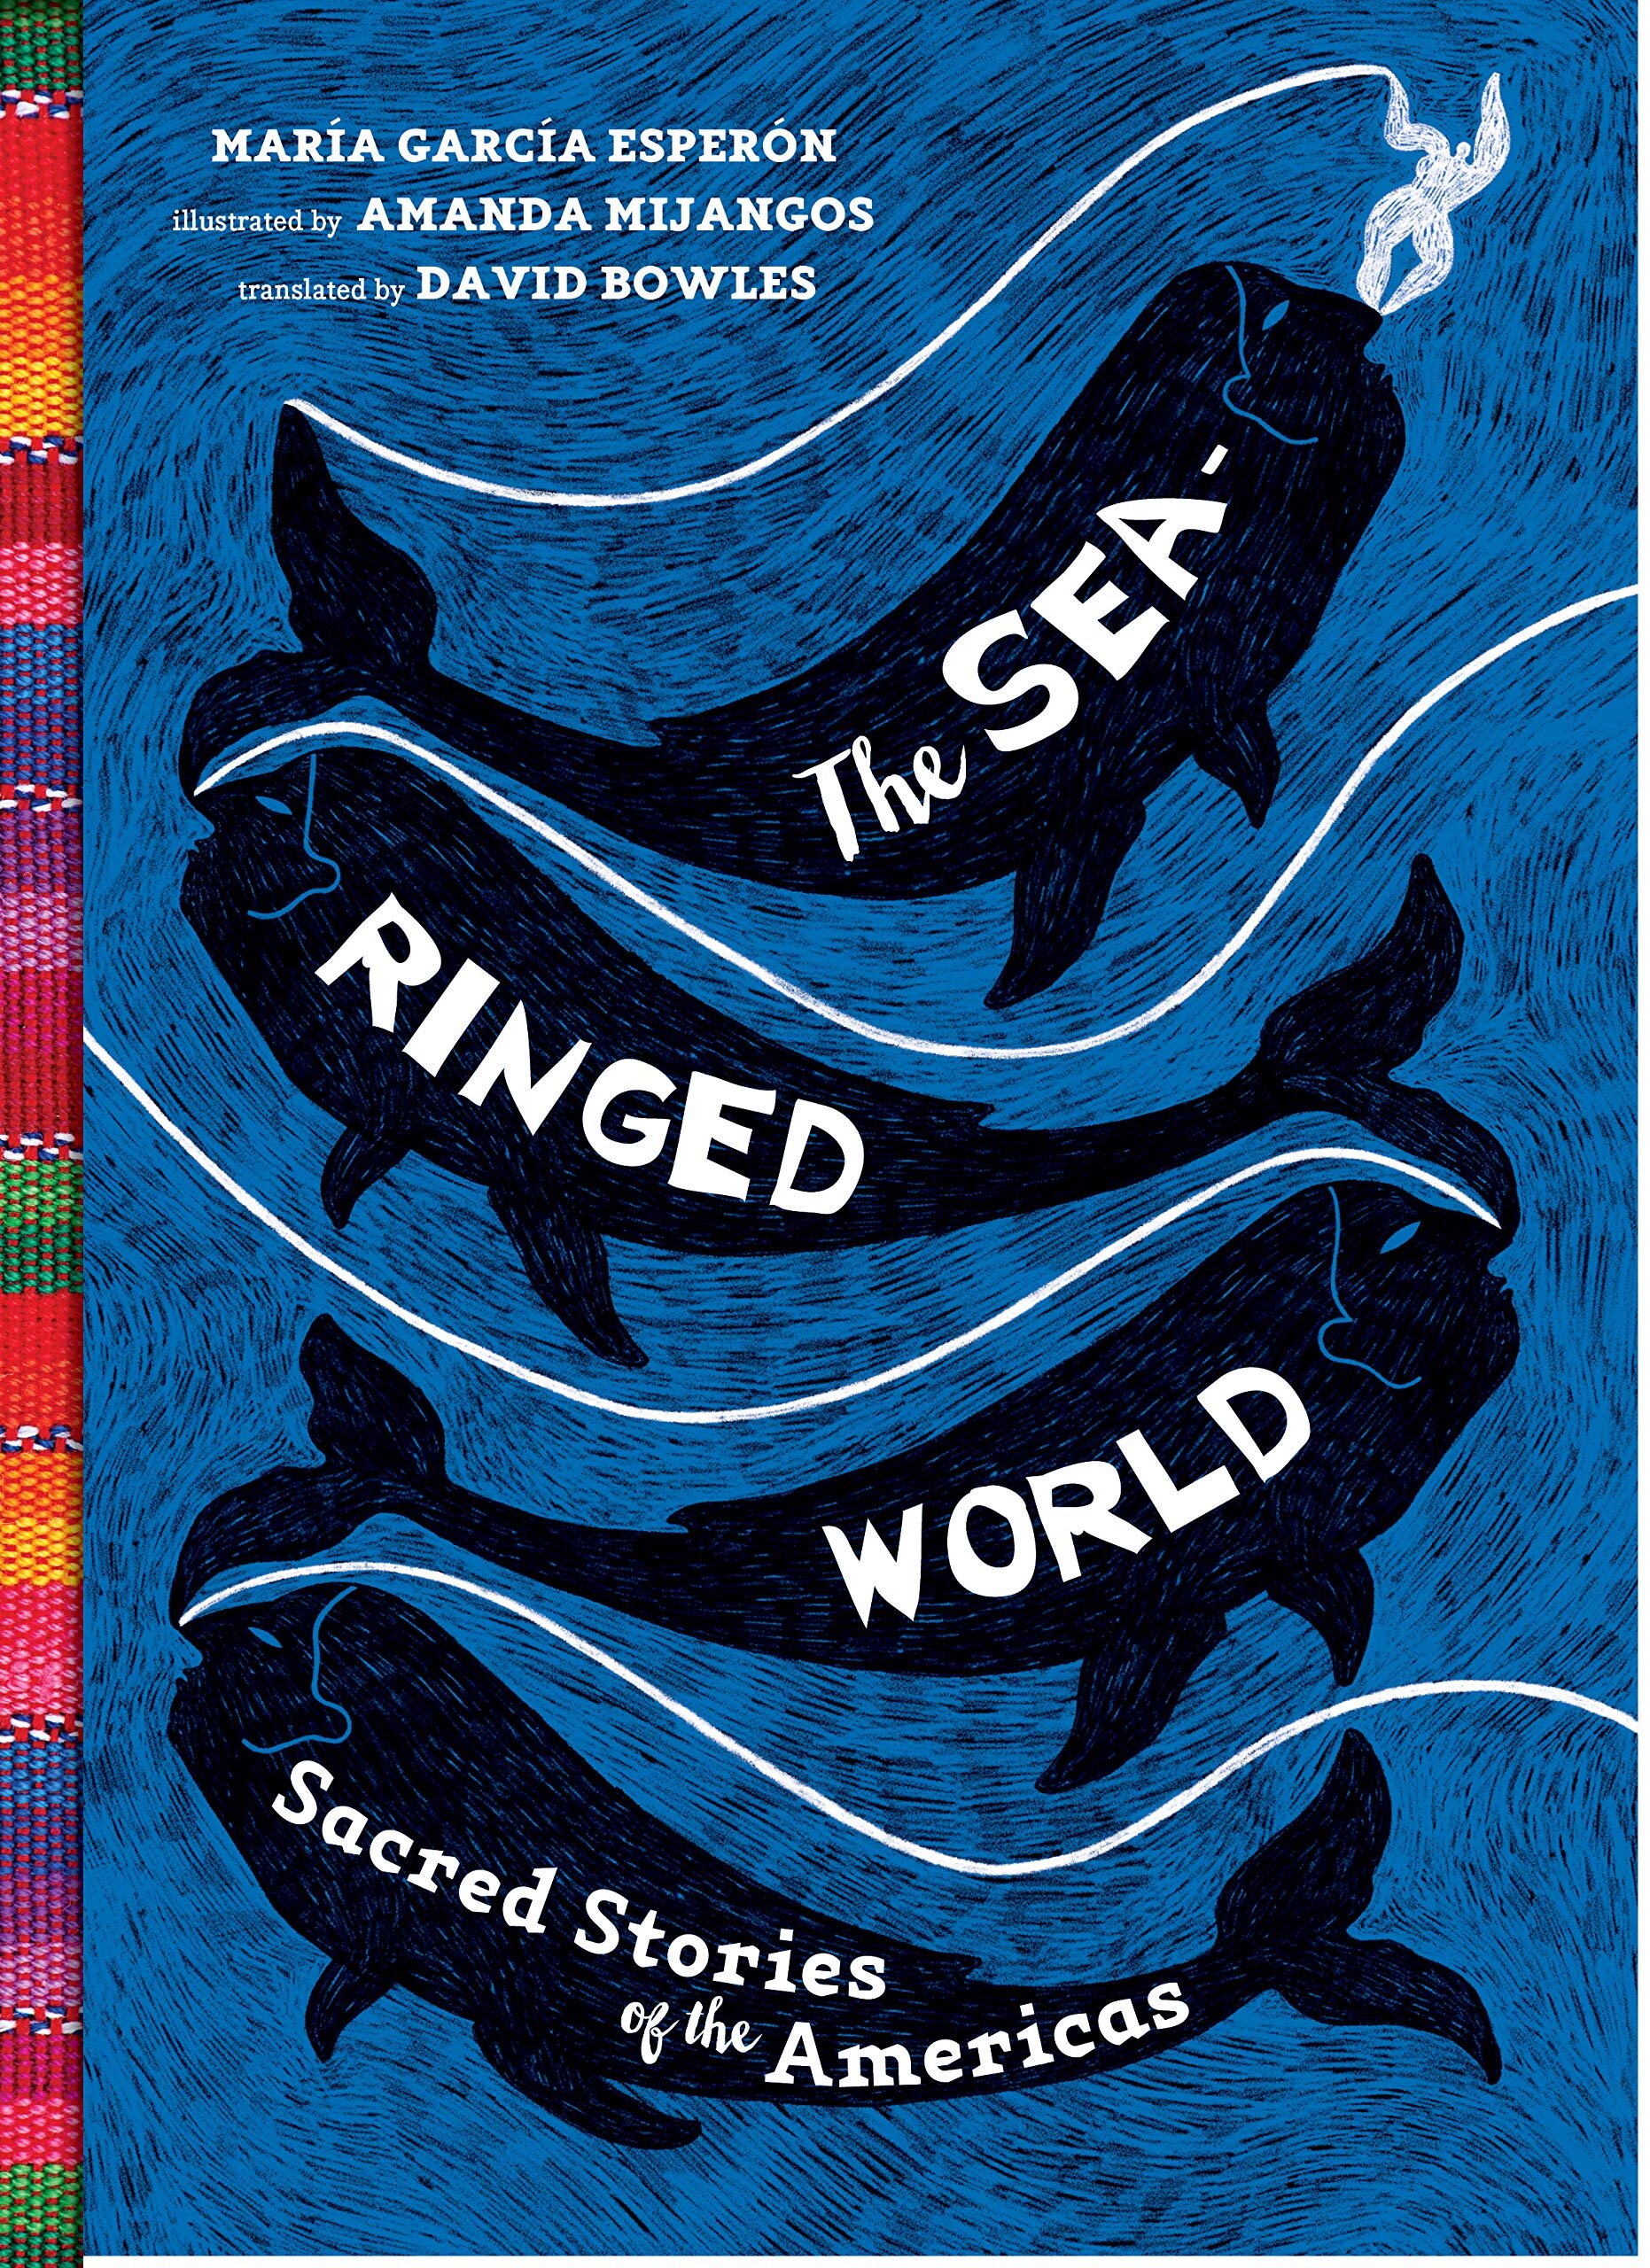 The Sea Ringed World: Sacred Stories of the Americas by Marcia Garcia Esperon